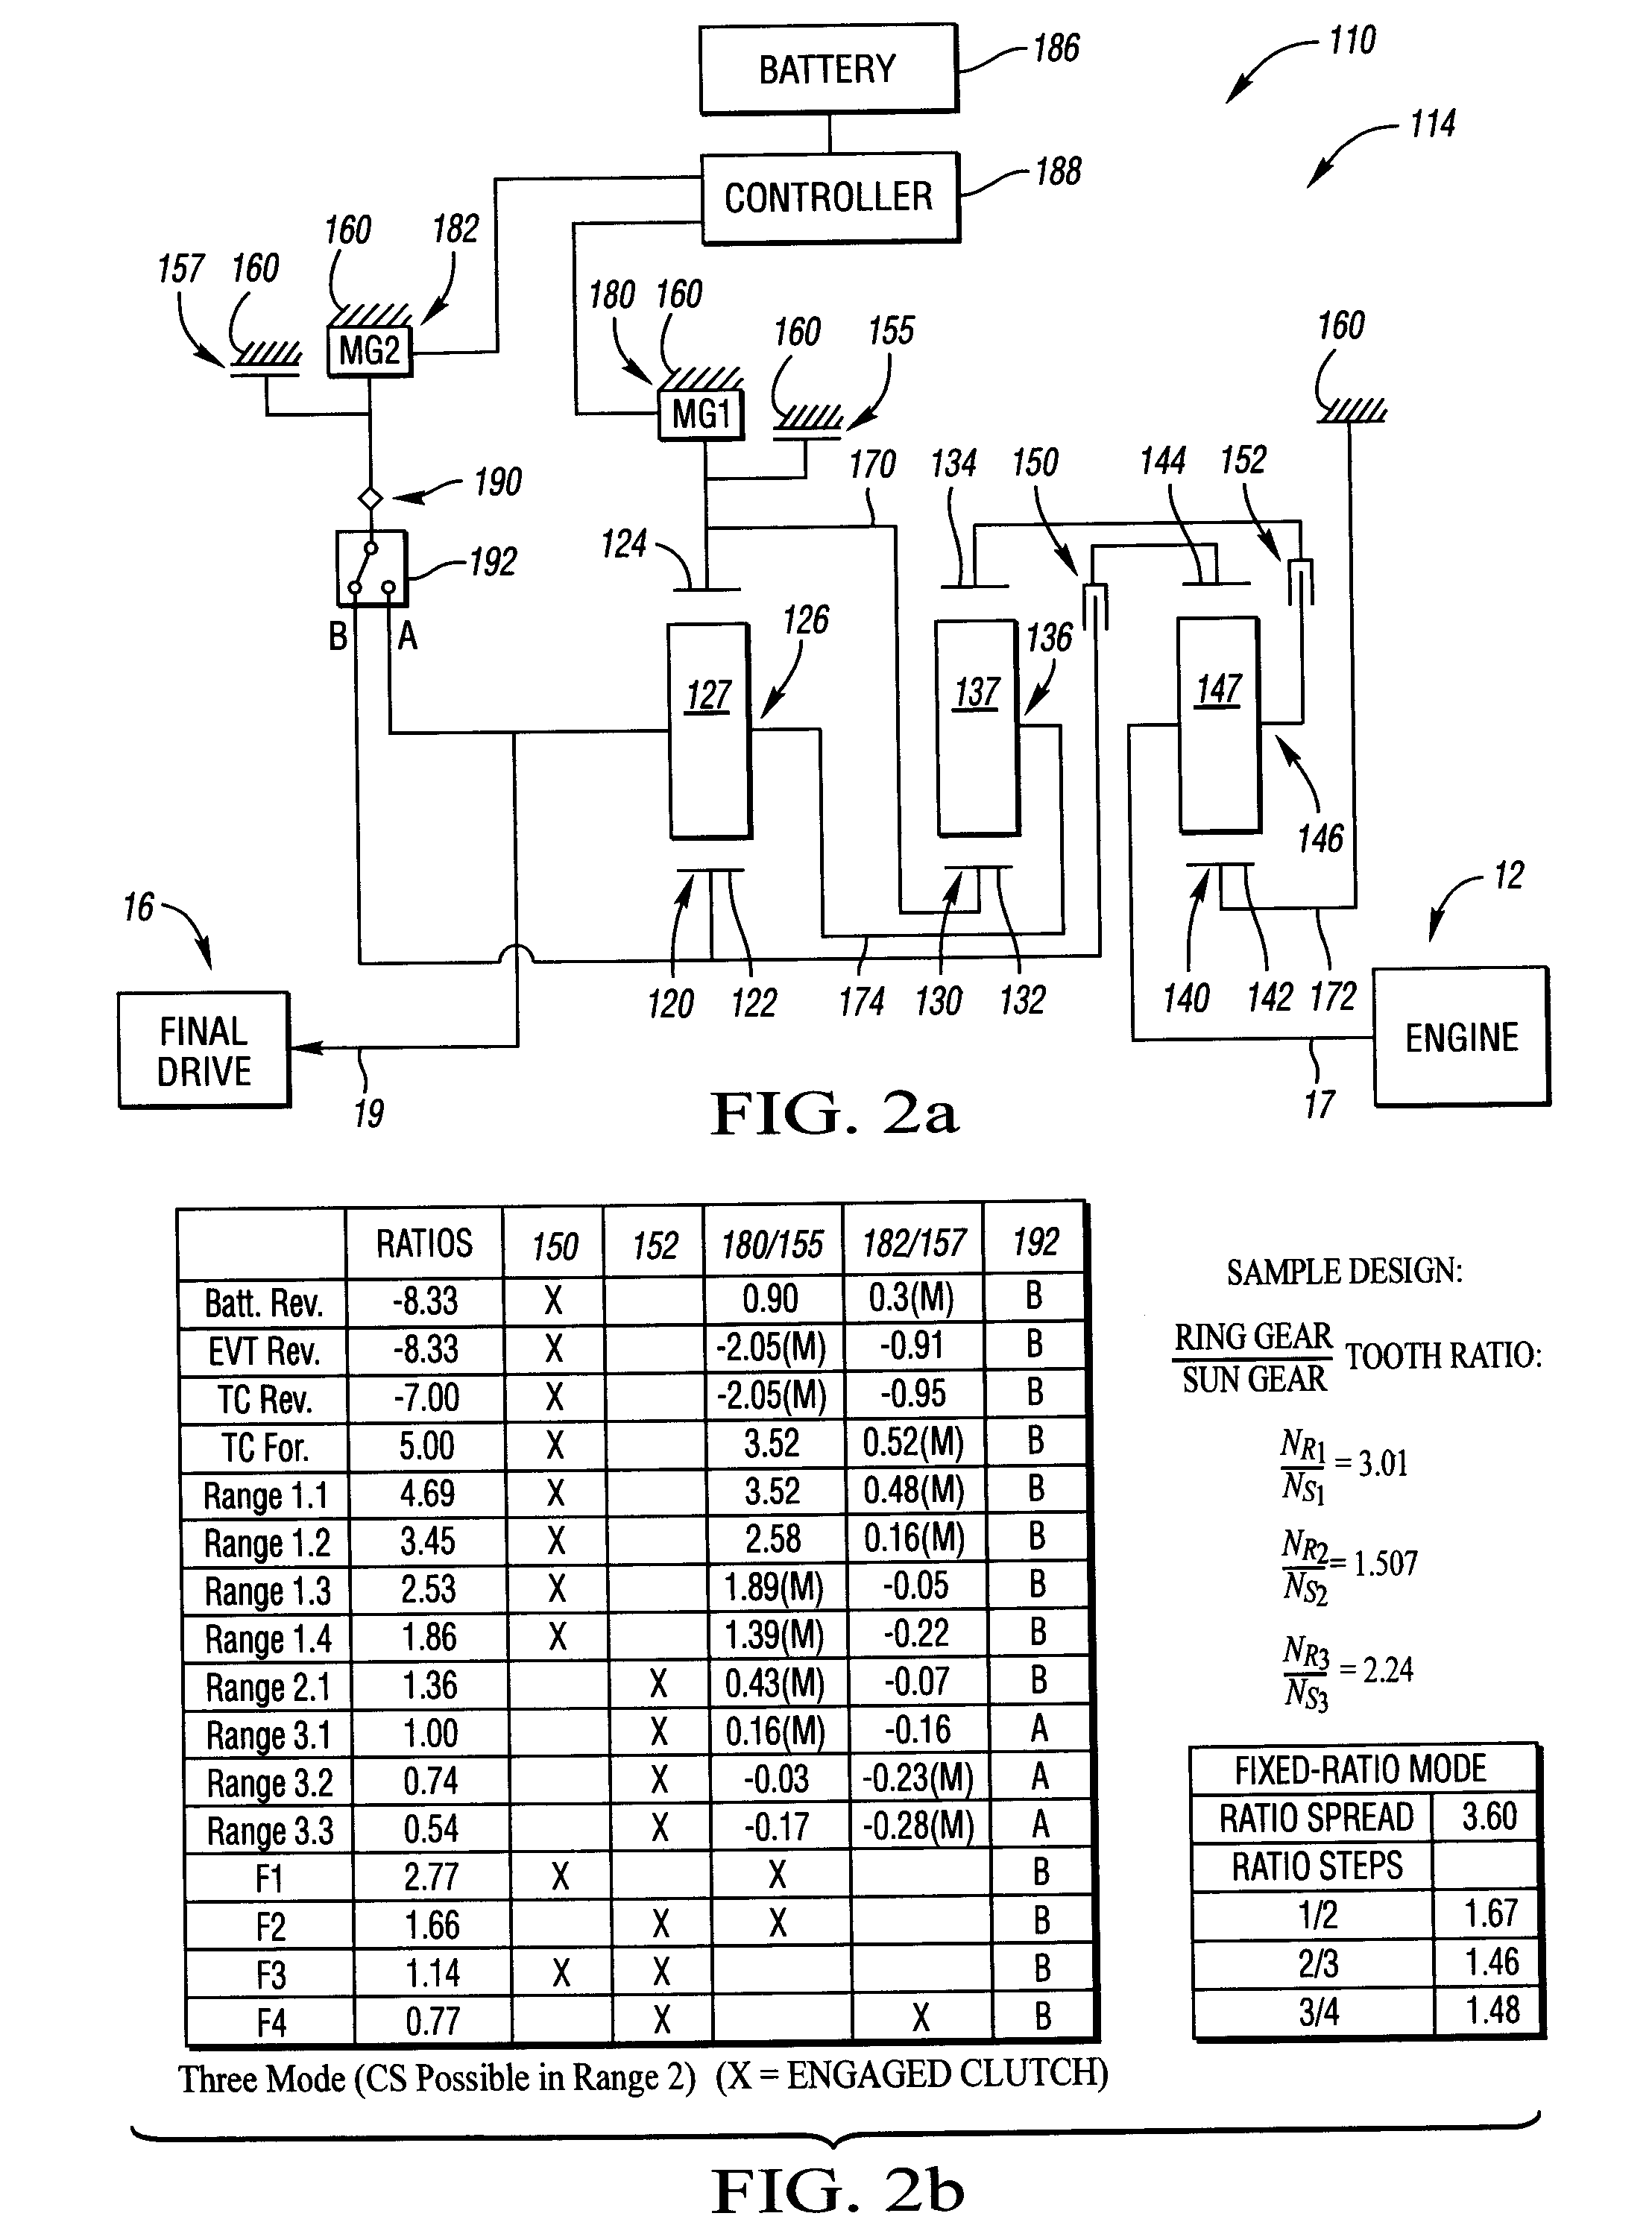 Electrically variable transmission having three planetary gear sets and clutched motor/generators